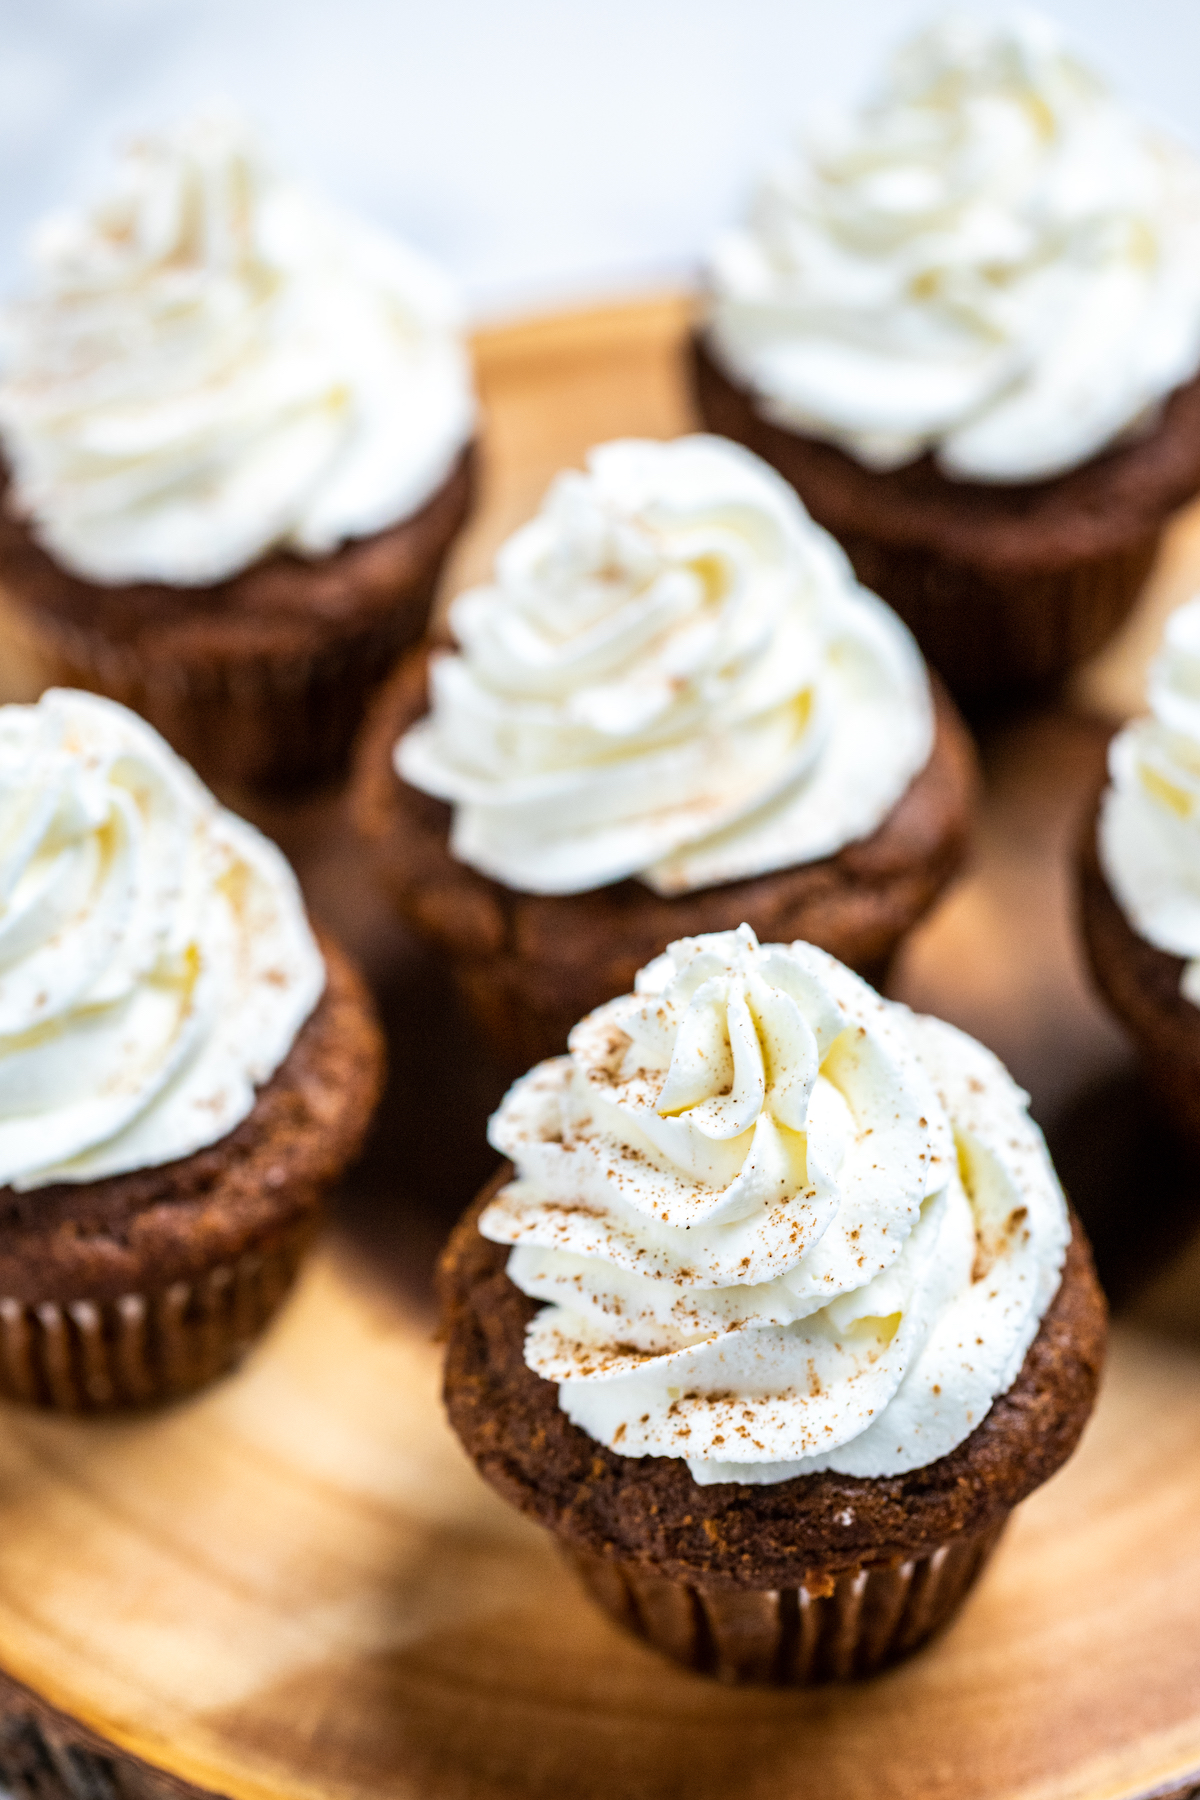 Gingerbread cupcakes topped with a swirl of frosting sitting on top of a wooden board.